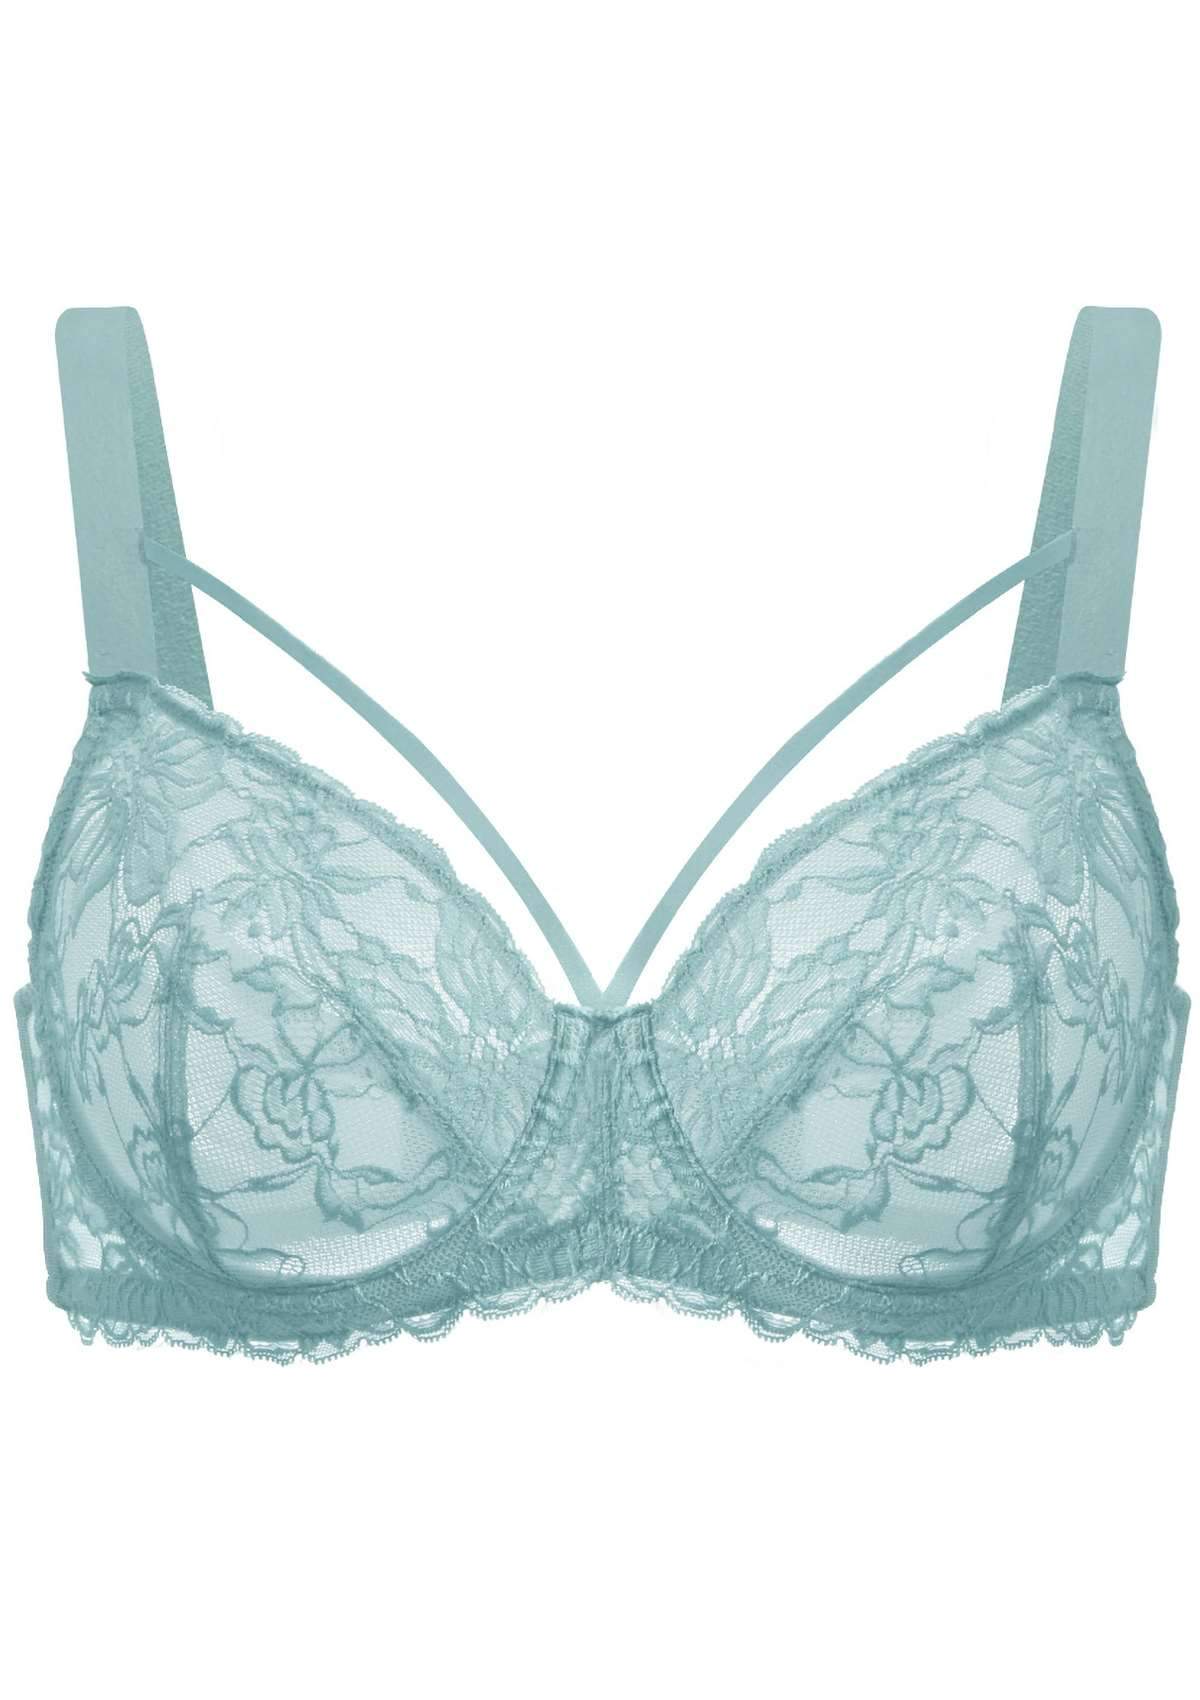 HSIA Pretty In Petals Unlined Lace Bra: Comfortable And Supportive Bra - Pewter Blue / 36 / D